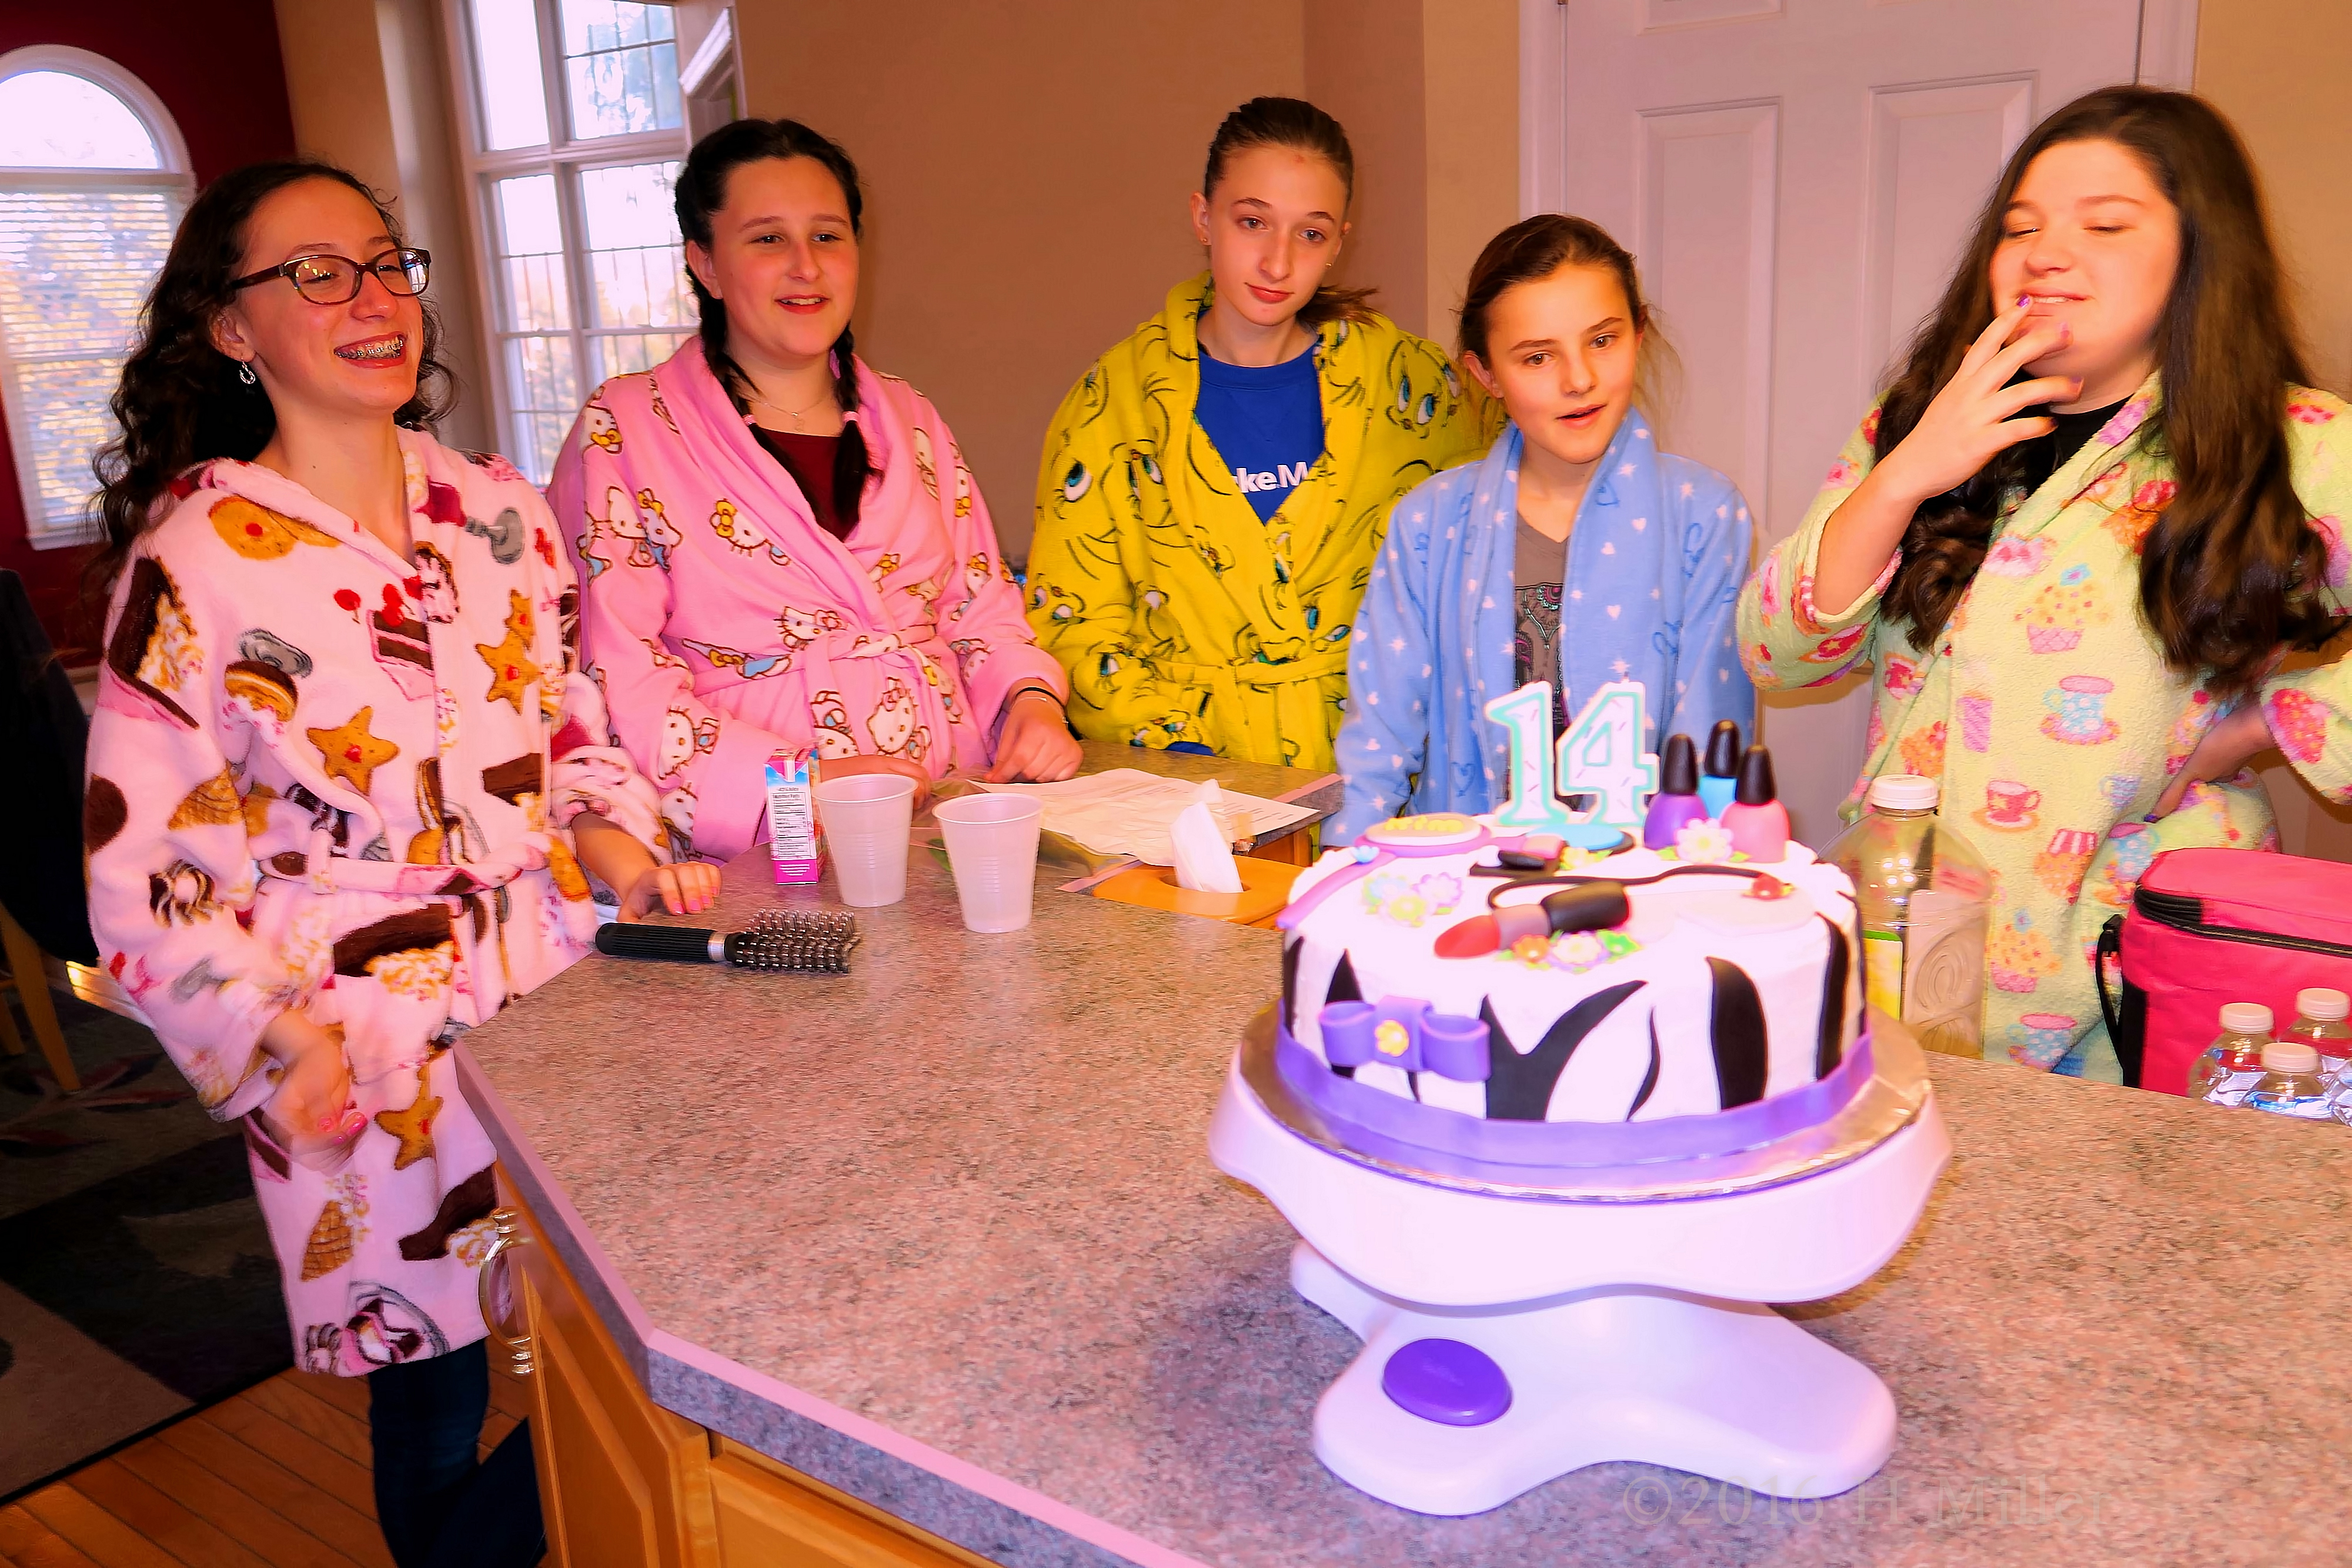 Cute Group Pic Around The Spa Themed Cake! 